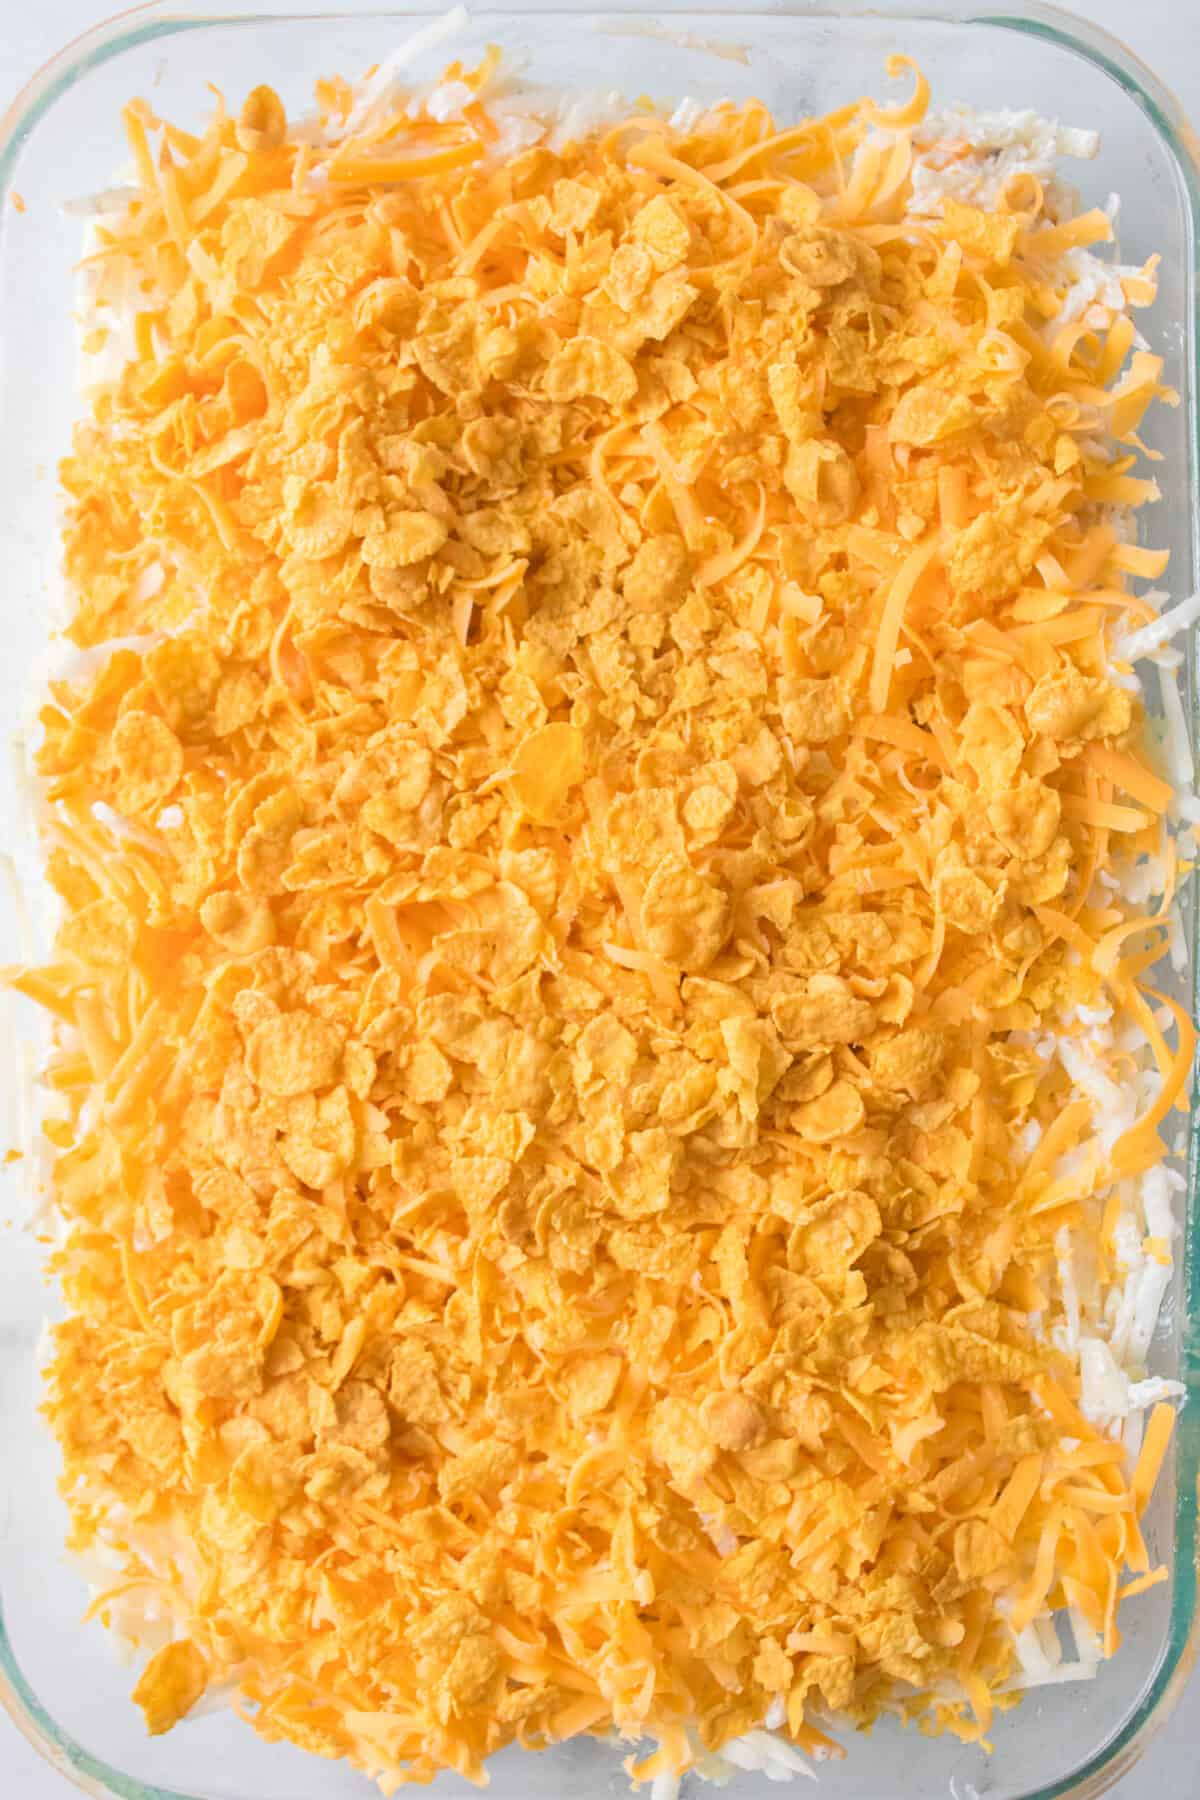 unbaked funeral potatoes topped with cheese and corn flakes in casserole dish